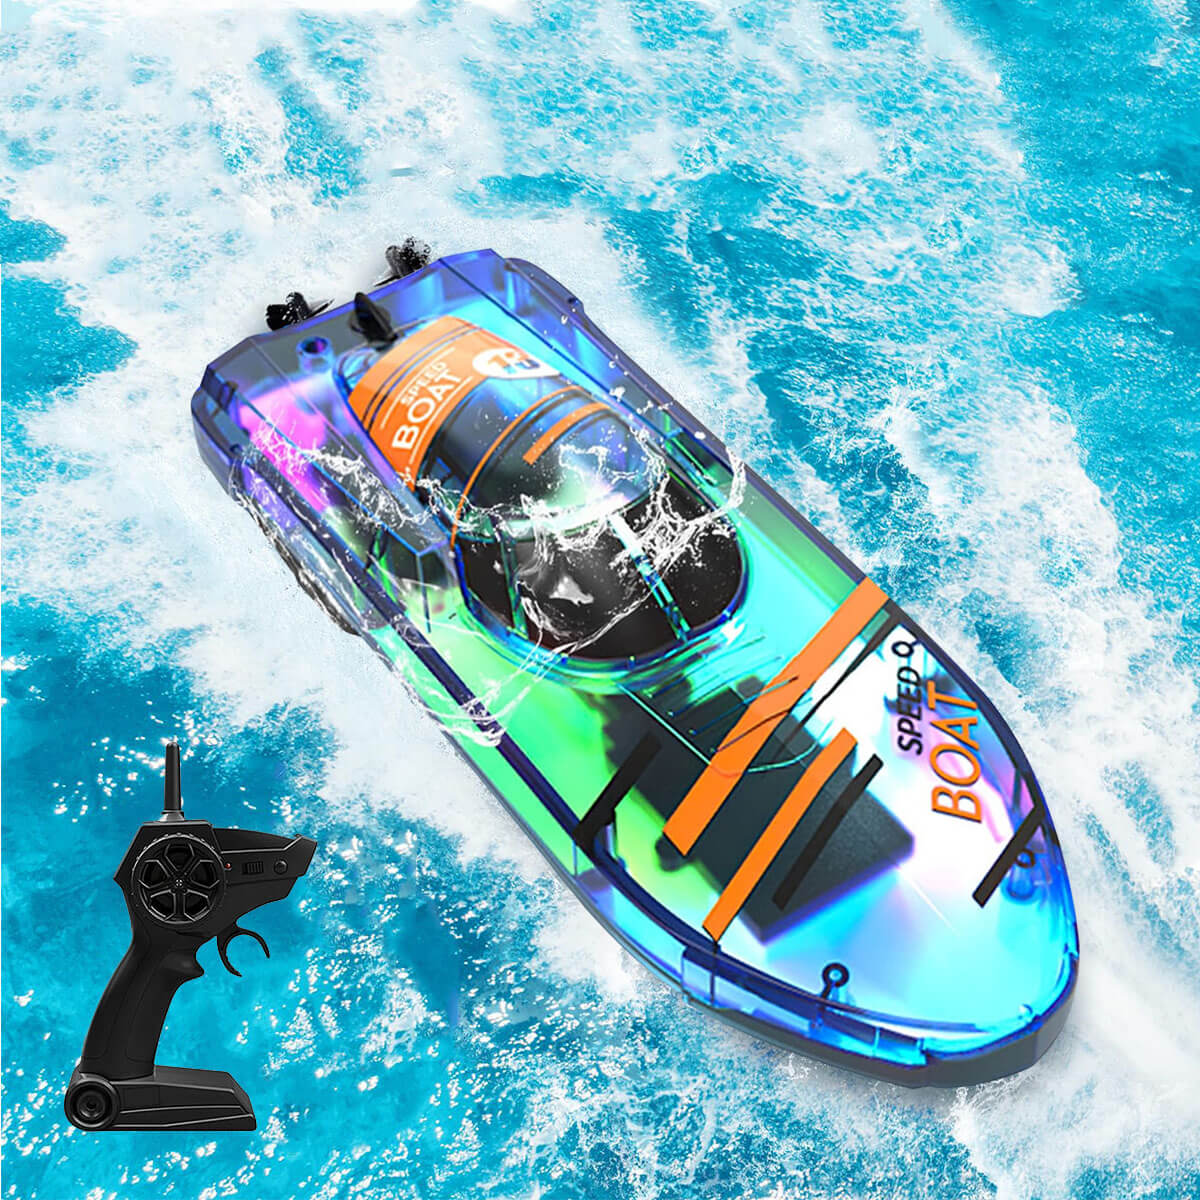 2.4Ghz Remote Control Boat with LED Light Waterproof Racing Boat for Pools & Lakes